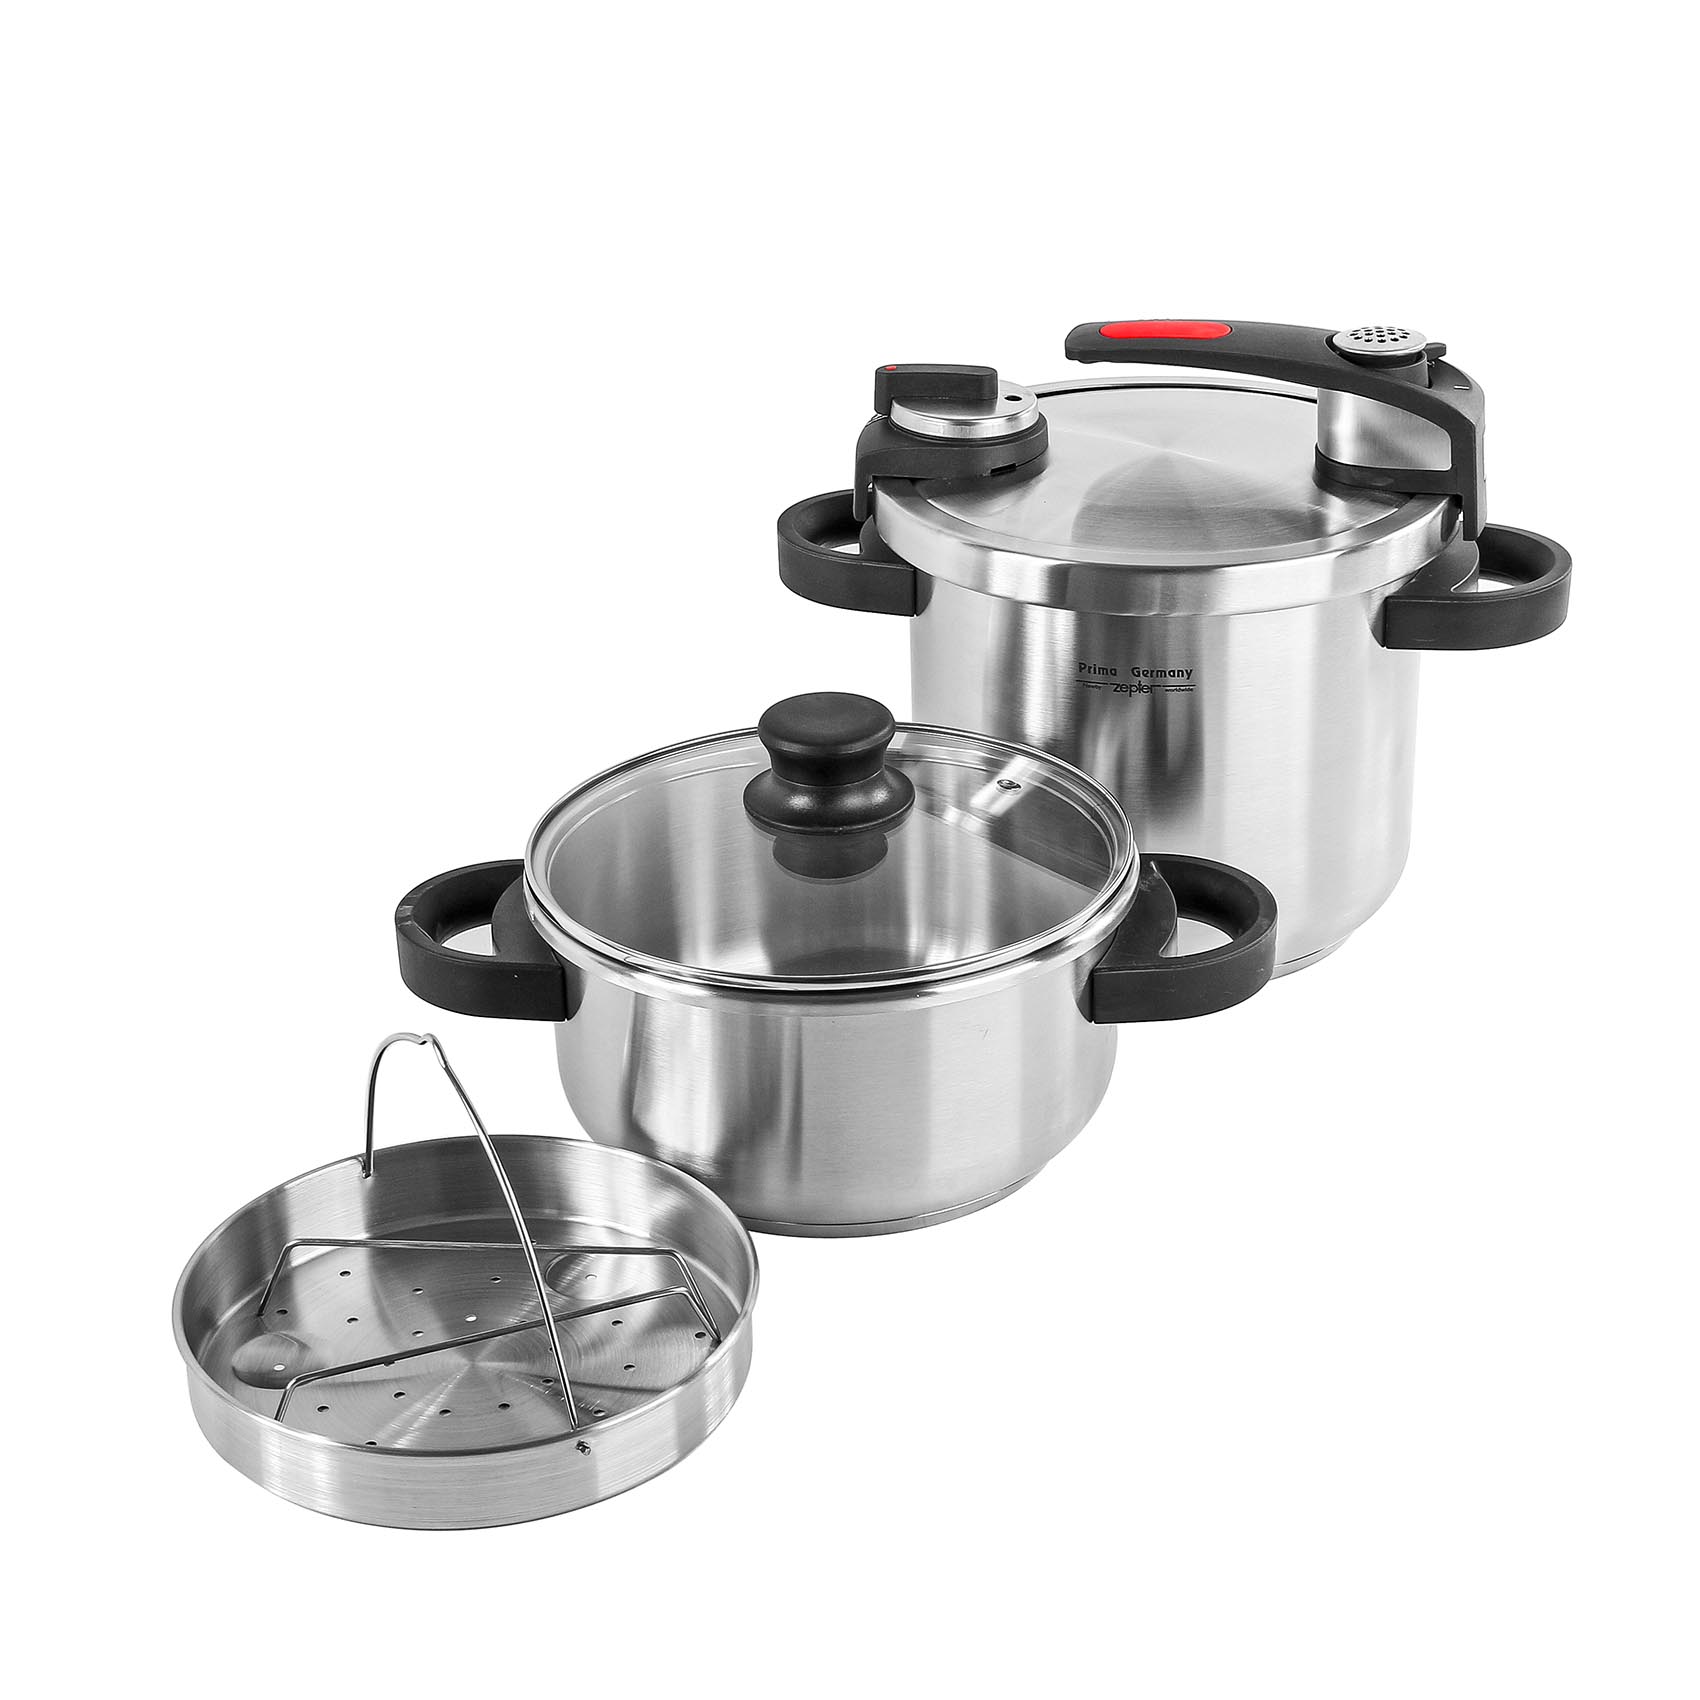 PRIMA Smart Pressure Cooker Stainless Steel 7Ltr + 4Ltr Cooking Pot with Glass Lid + Steam plate DSA-5 4+7L